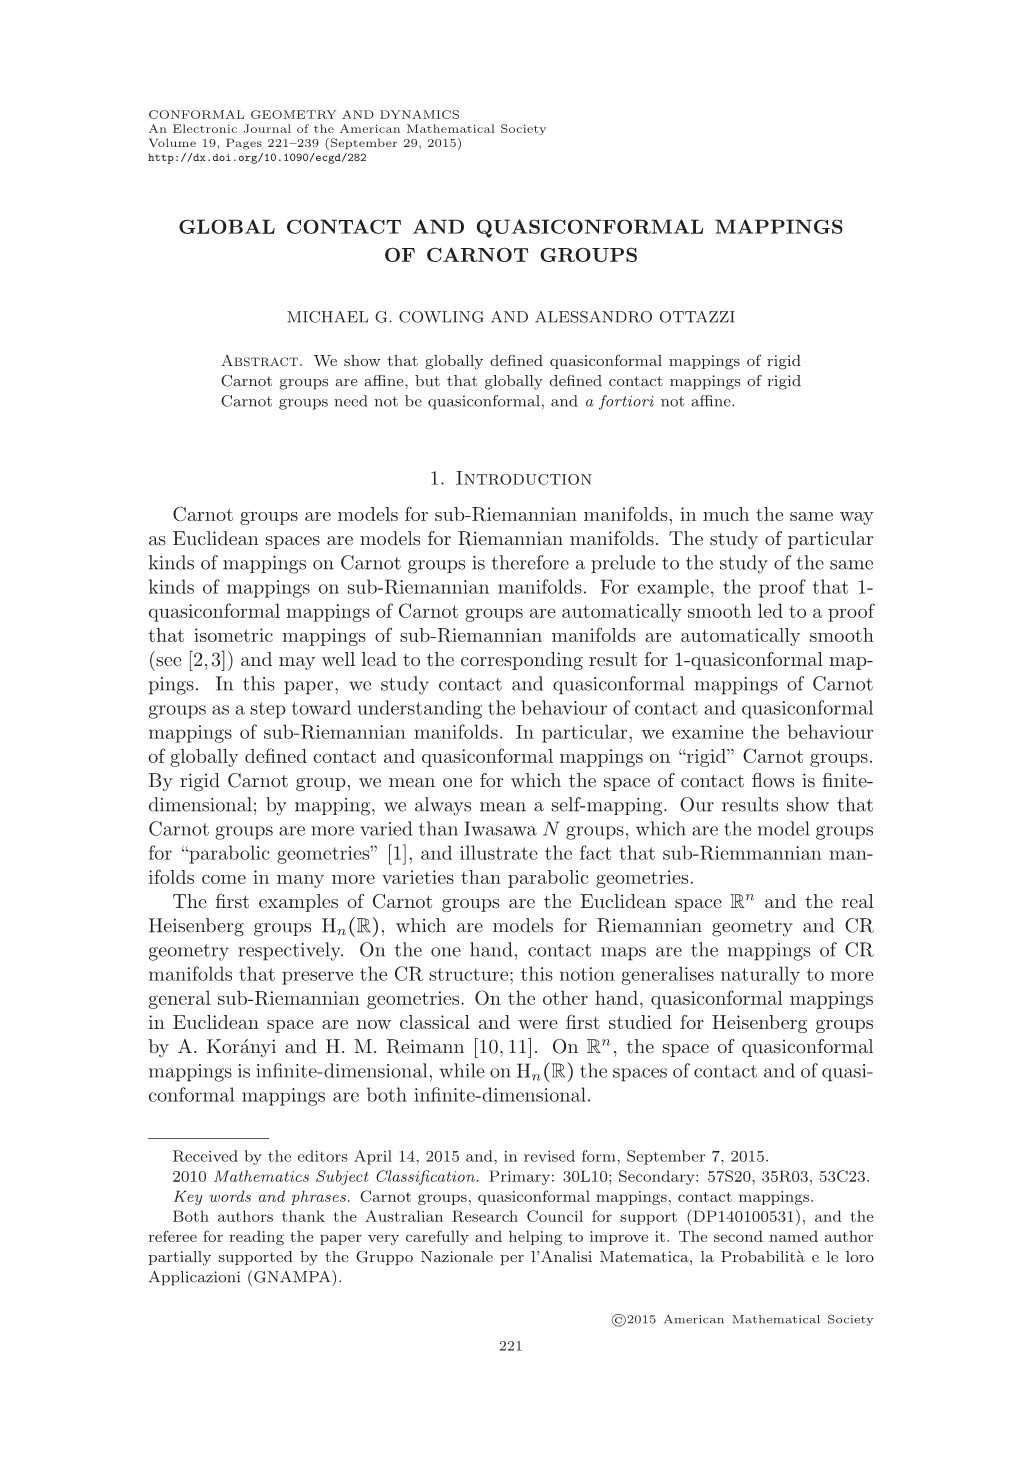 Global Contact and Quasiconformal Mappings of Carnot Groups